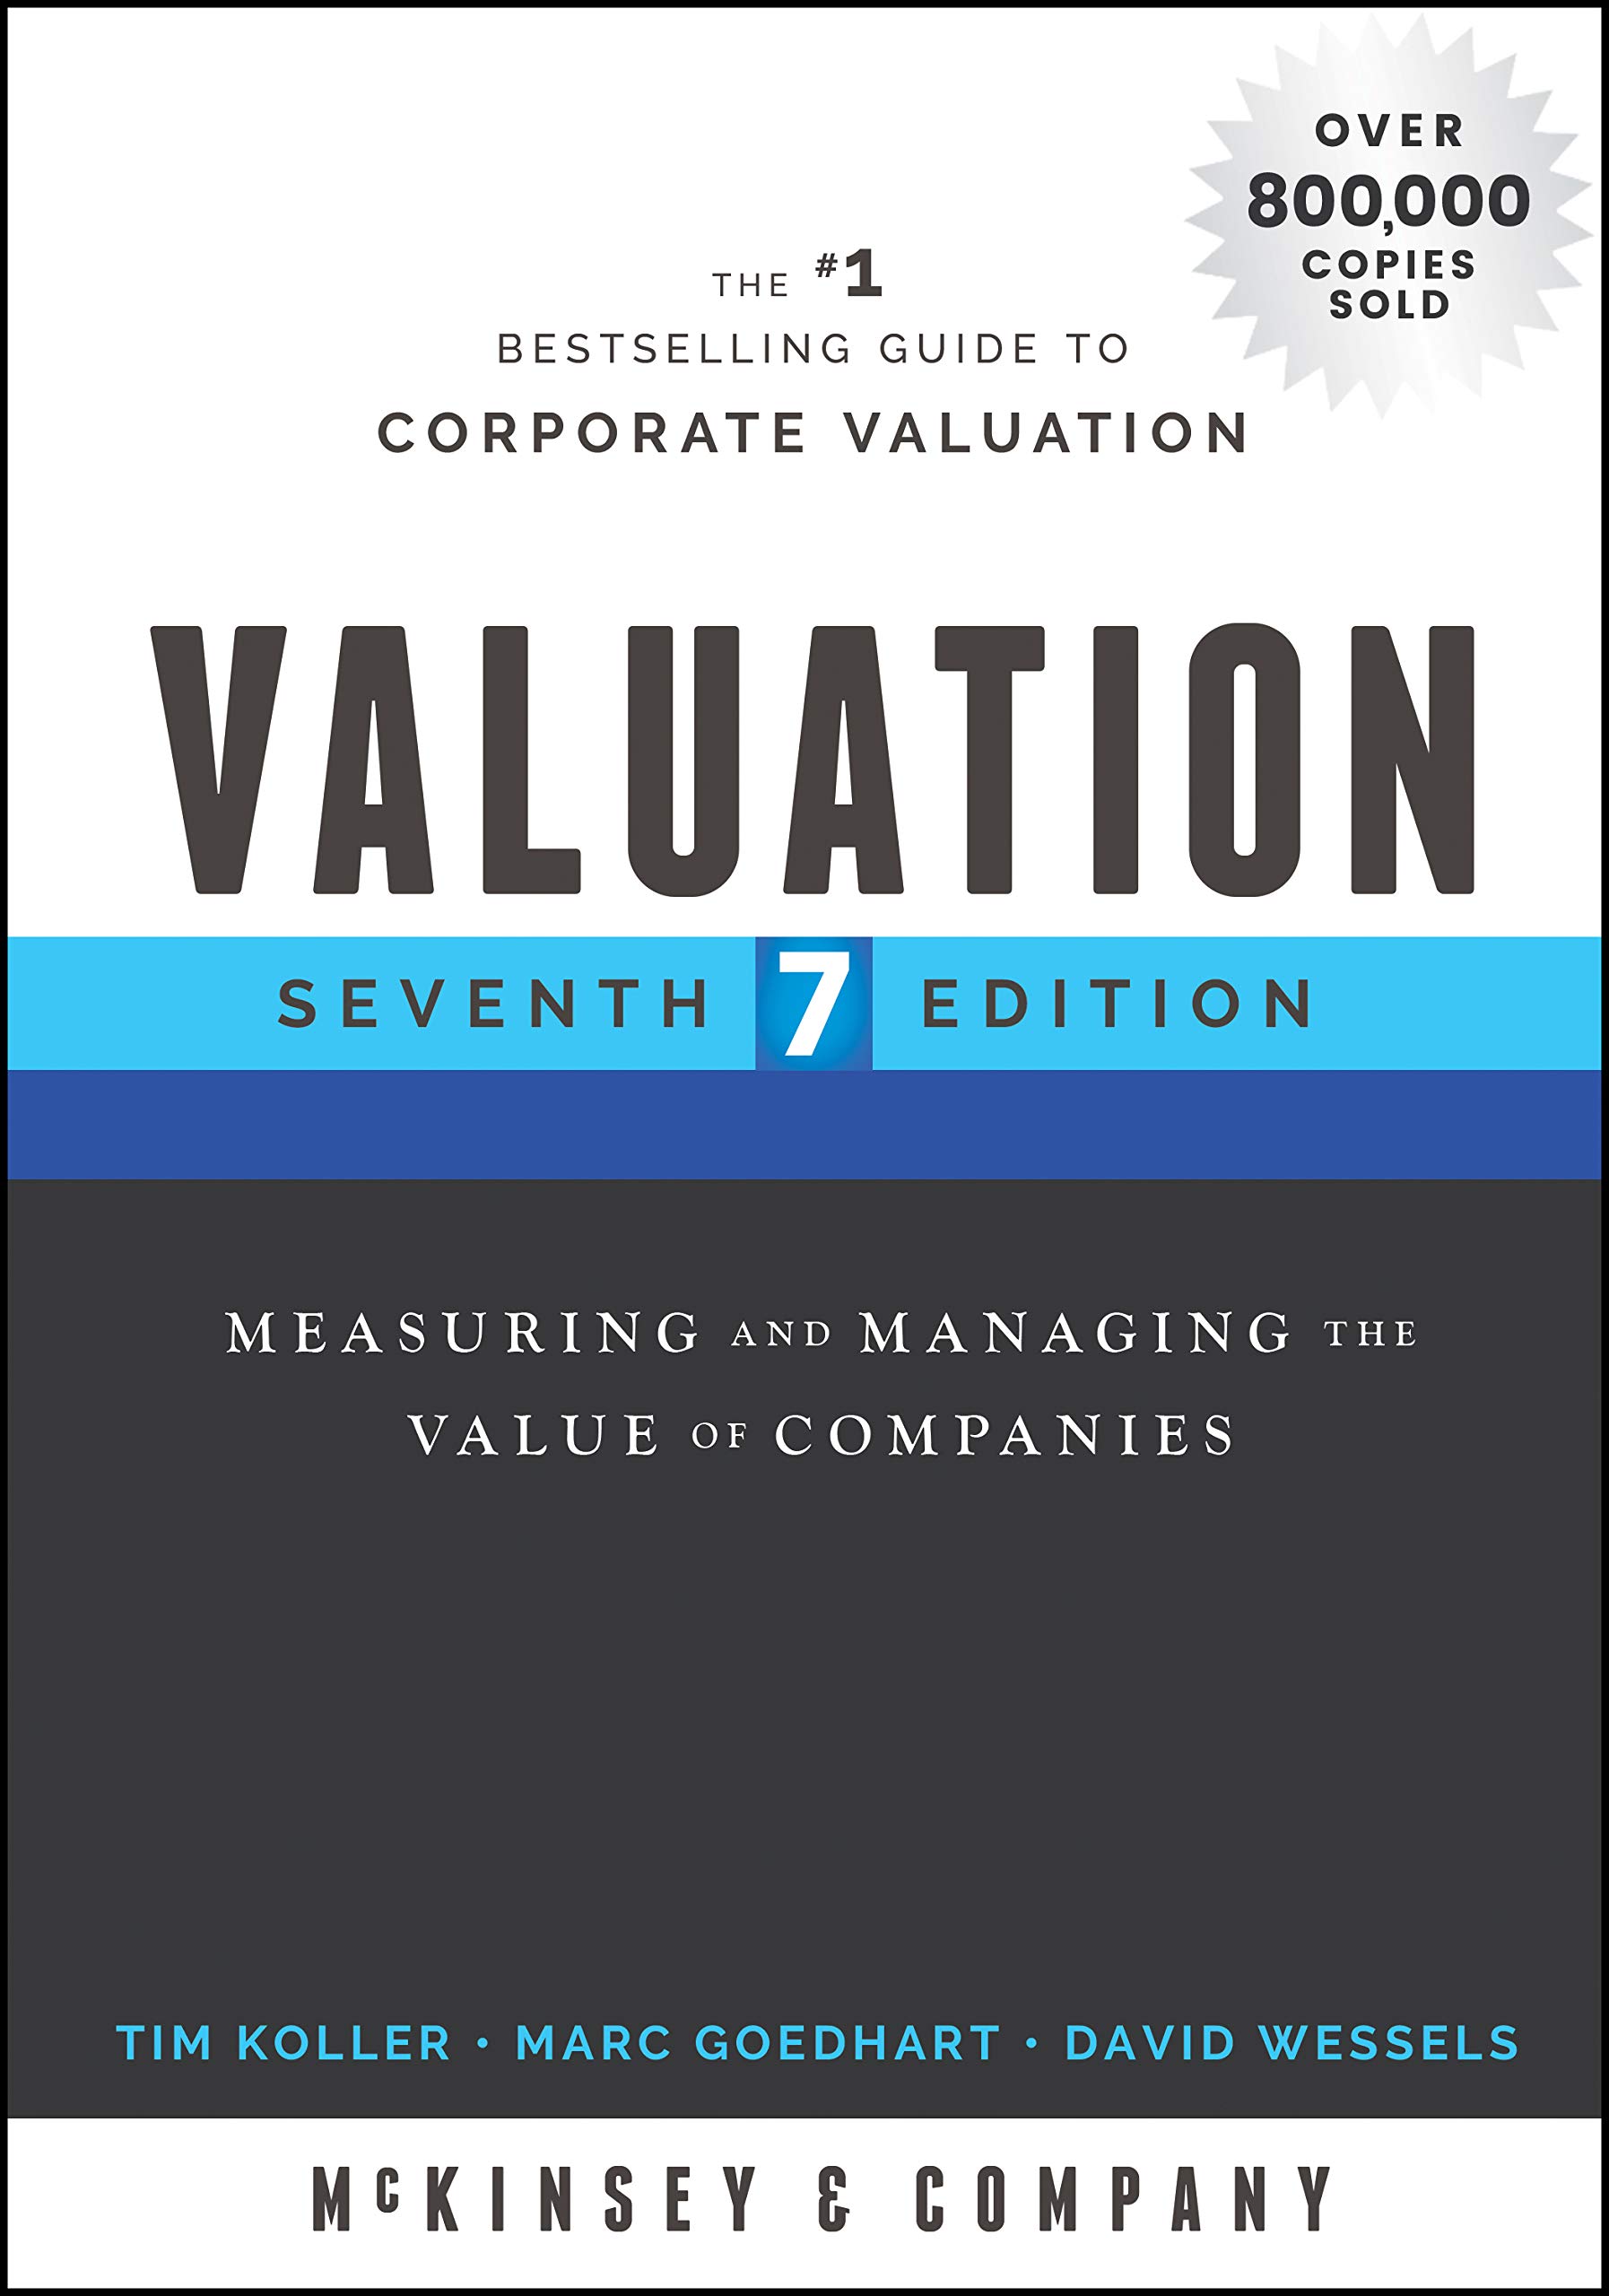 Valuation: measuring and managing the value of companies